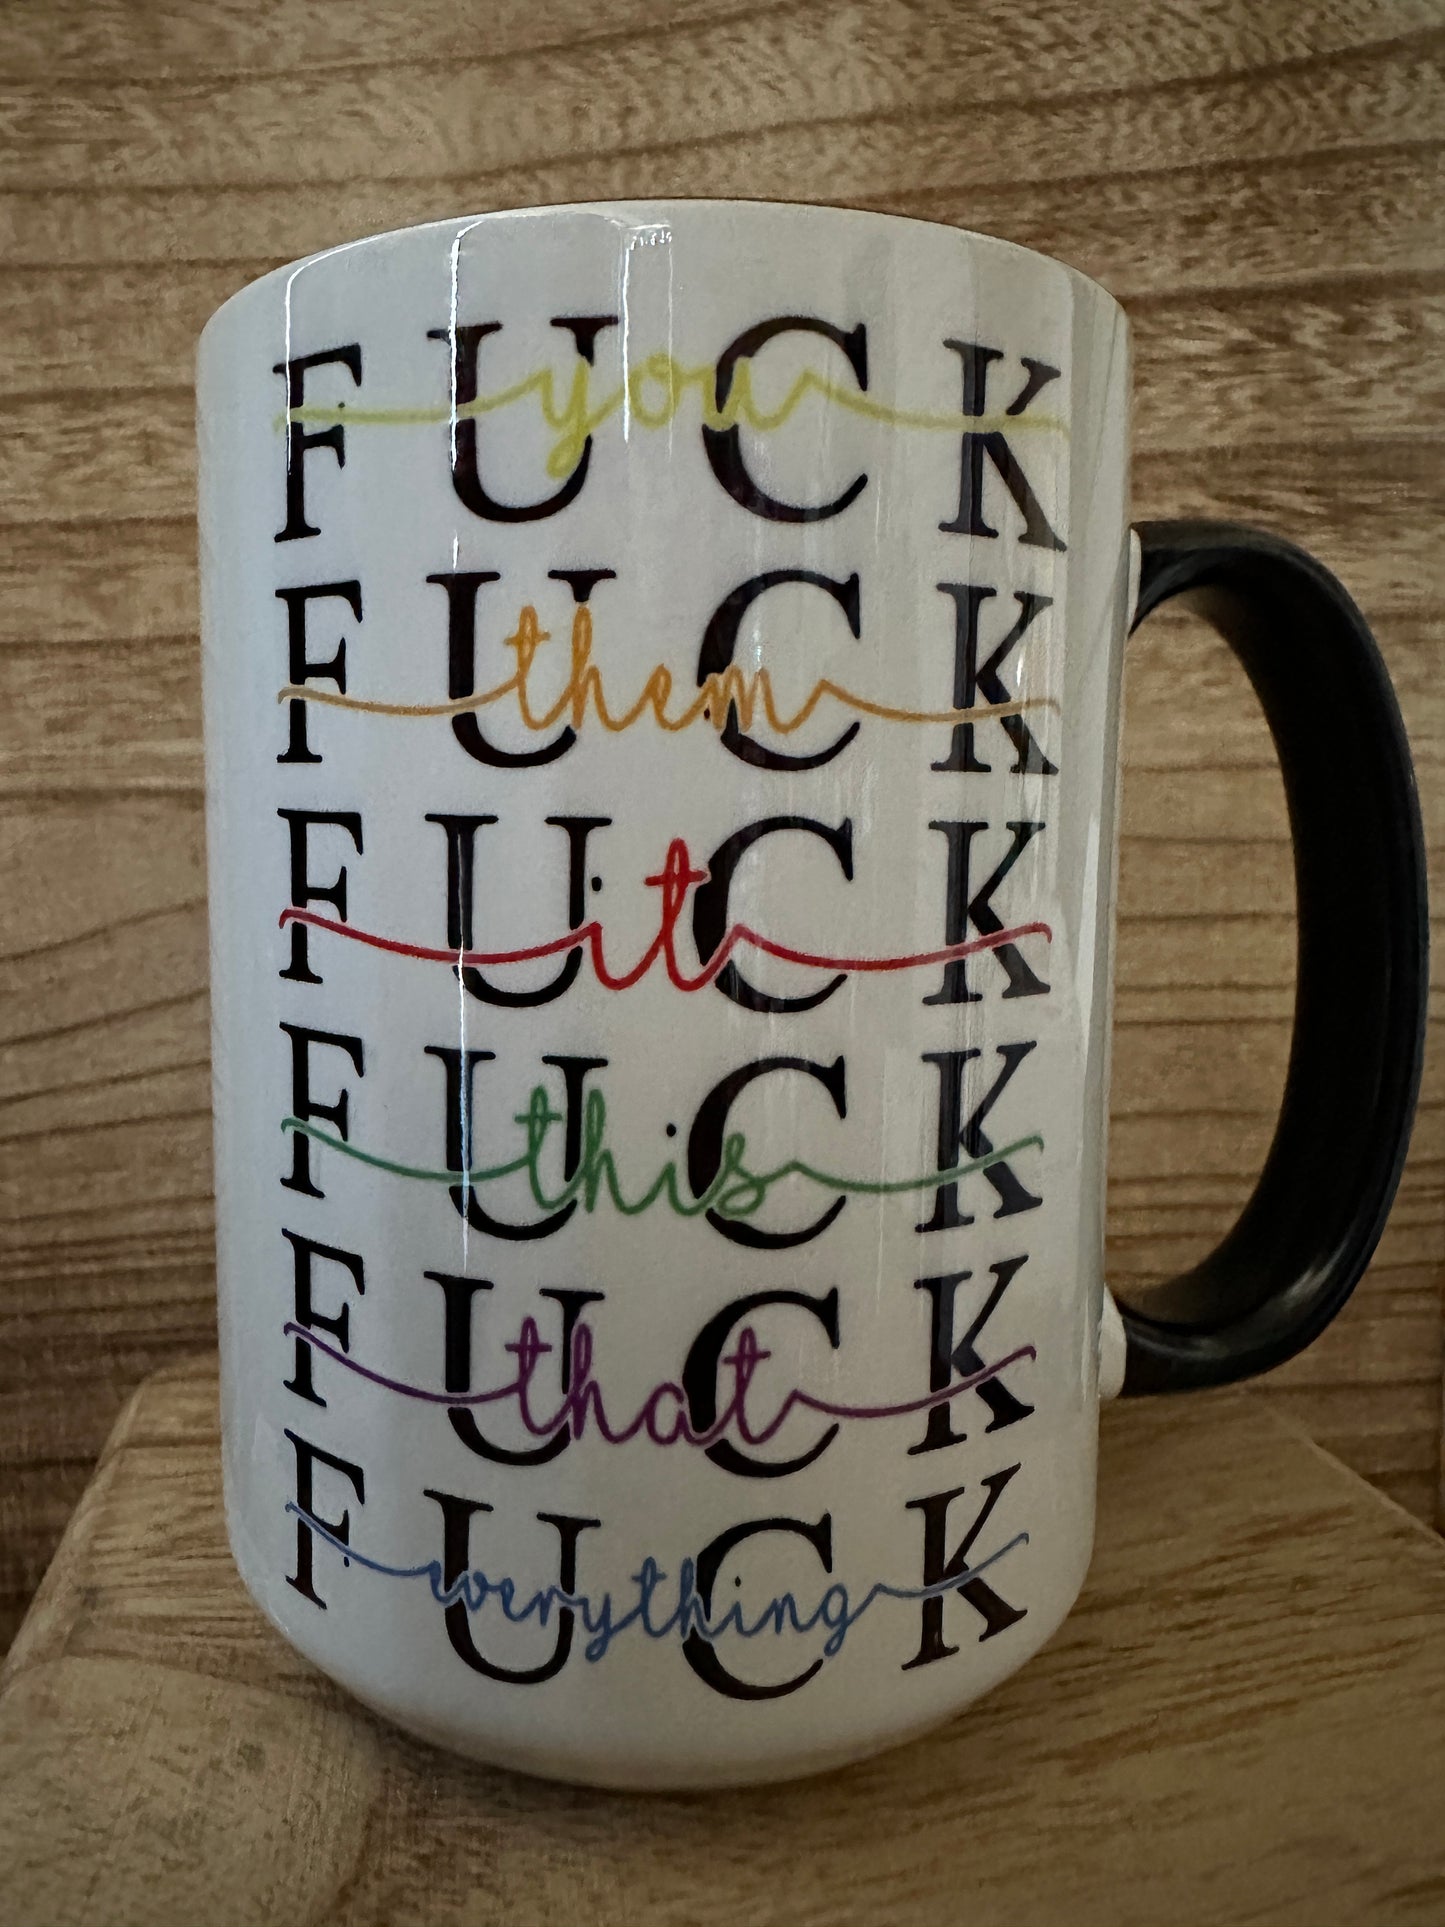 "Fuck" is the most versatile word (multi-color) 15oz Coffee Cup